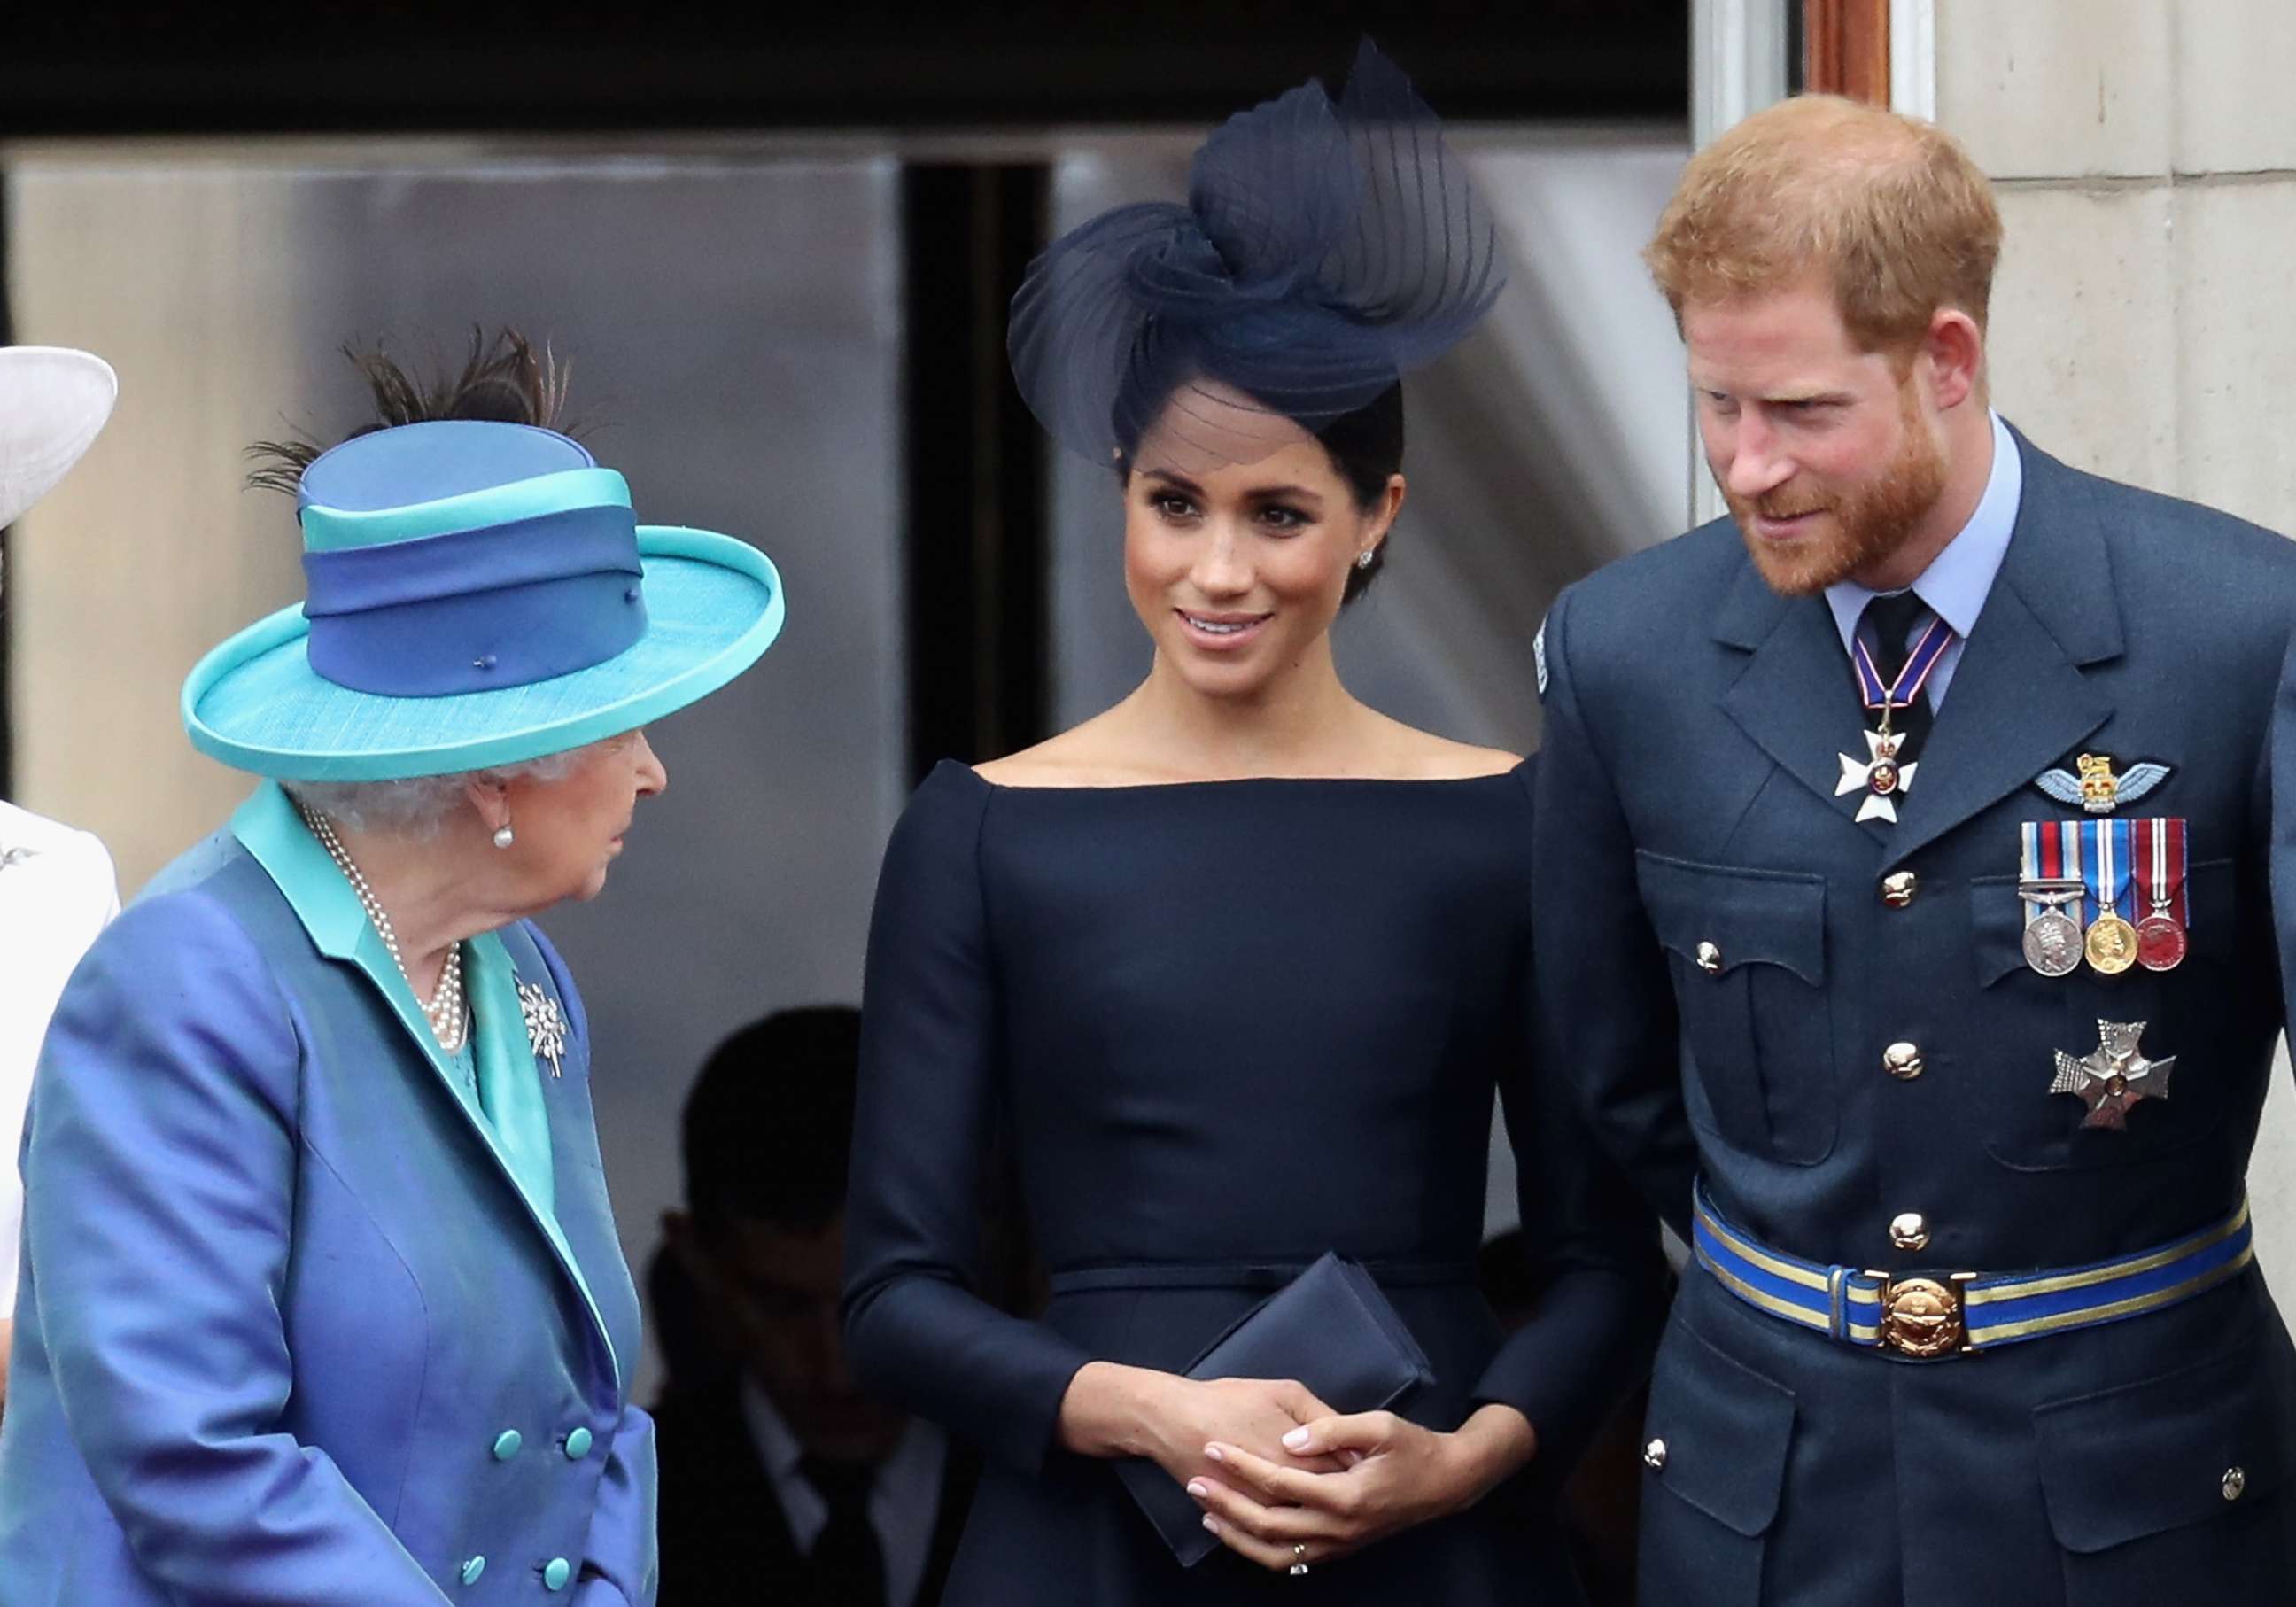 PHOTO: Queen Elizabeth II, Meghan, Duchess of Sussex, Prince Harry, Duke of Sussex watch the RAF flypast on the balcony of Buckingham Palace, as members of the Royal Family attend events to mark the centenary of the RAF on July 10, 2018 in London.